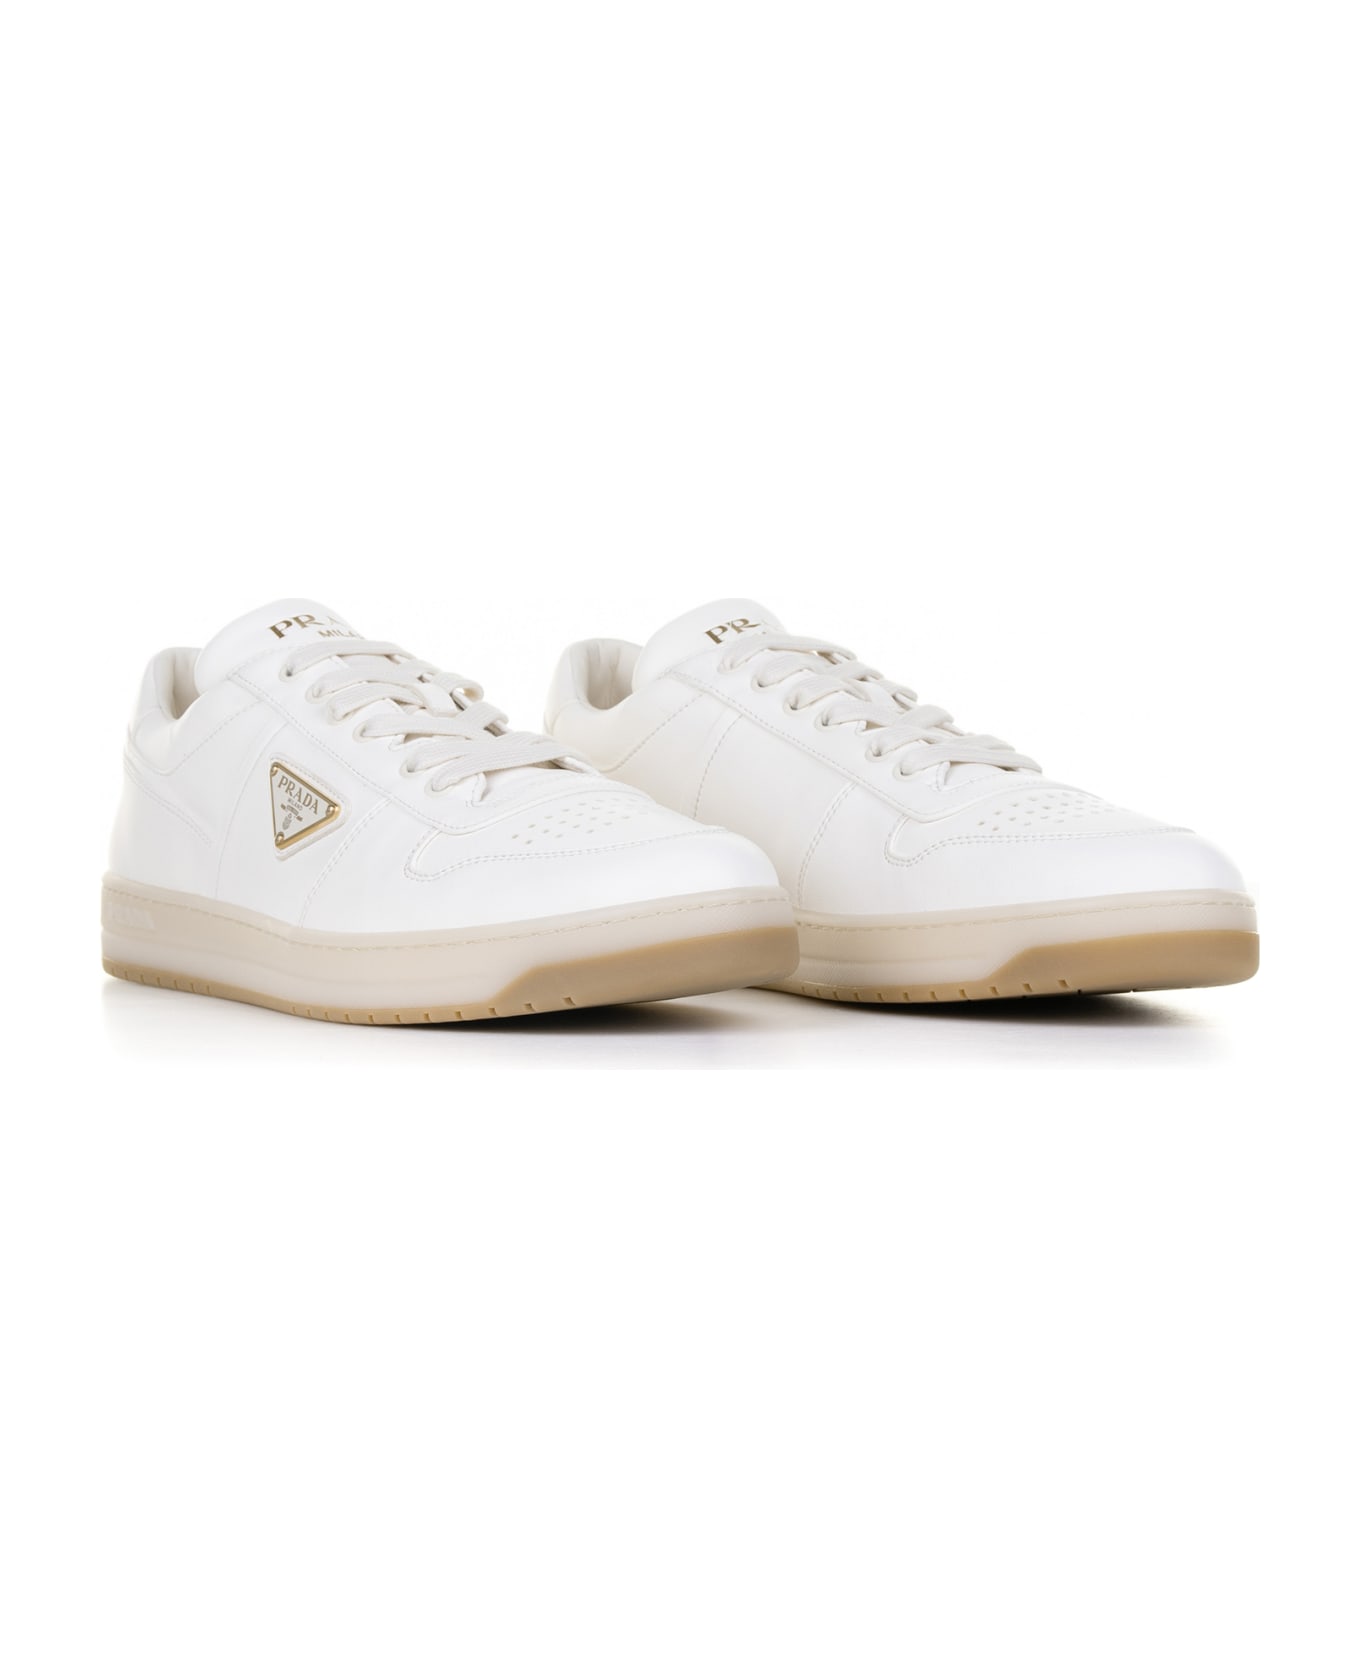 Prada Downtown Sneakers In Nappa Leather With Logo - Avorio